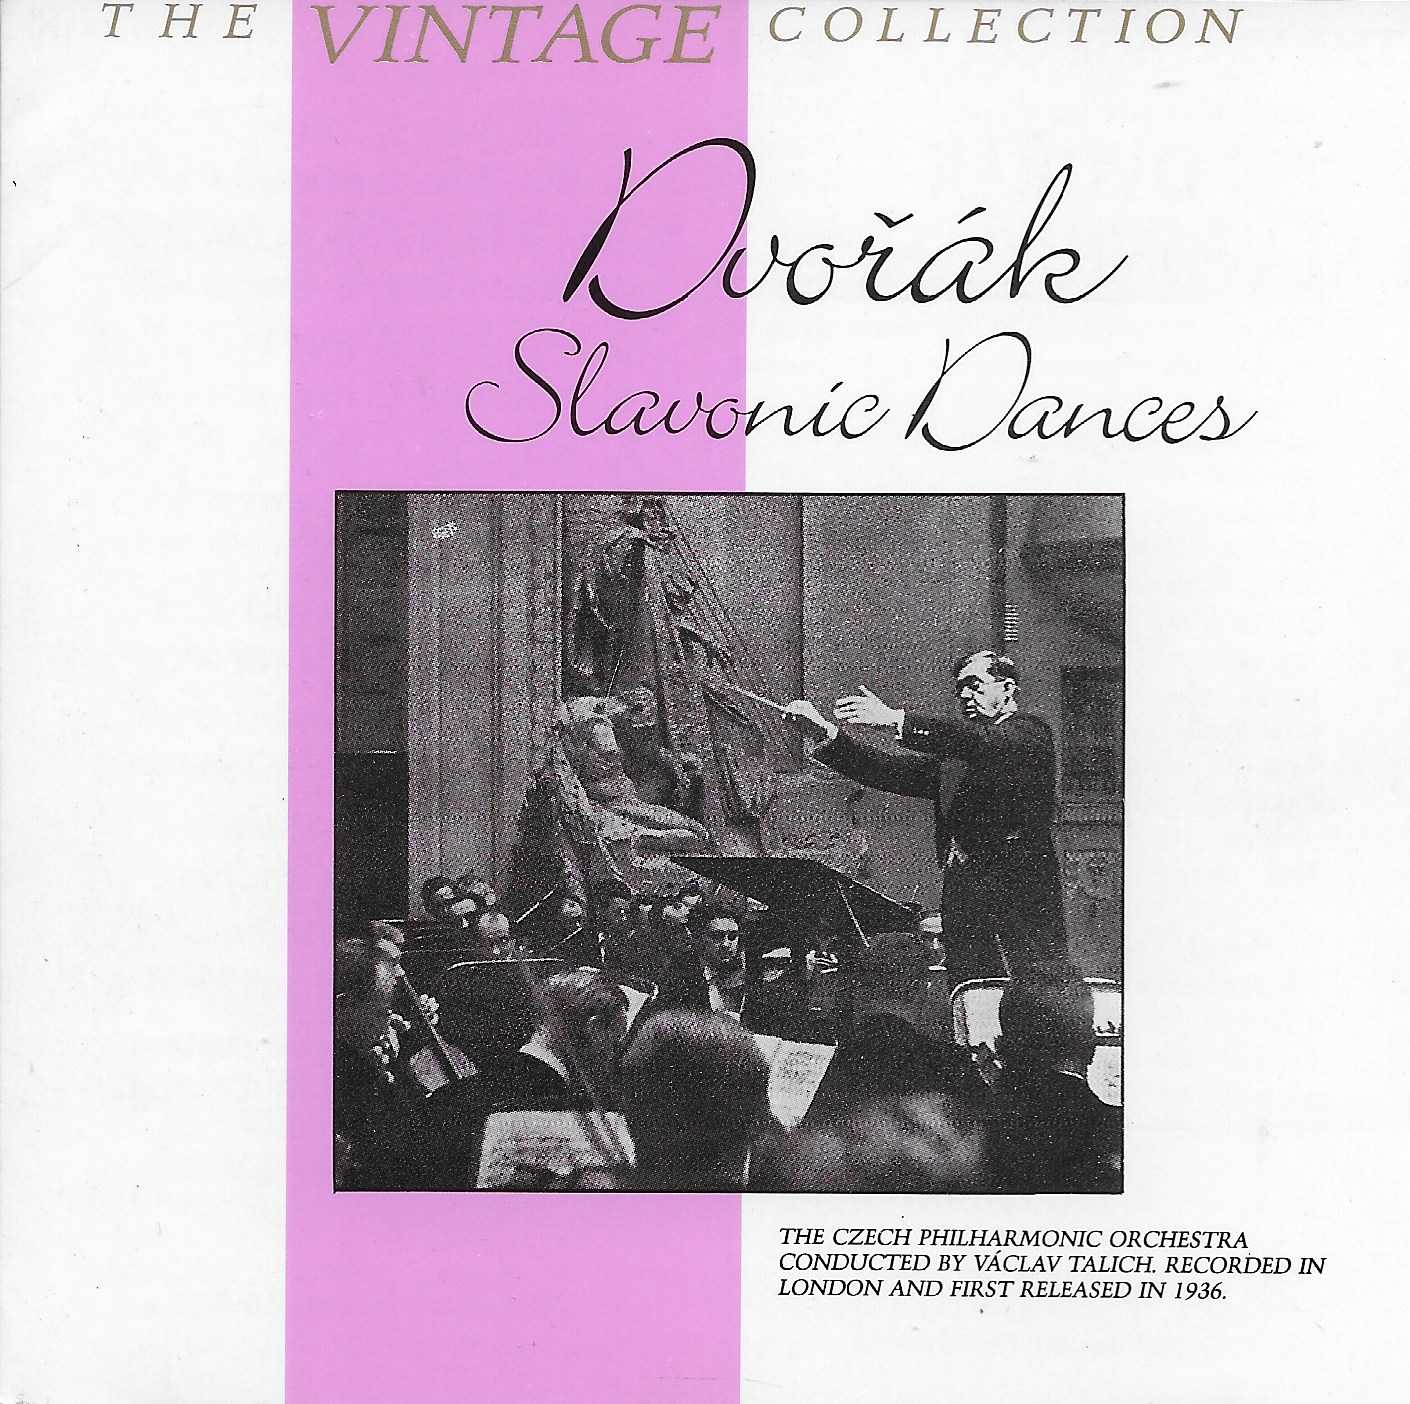 Picture of BBCCD731 The vintage collection - Dvorak Slavonic dances by artist Dvorak from the BBC cds - Records and Tapes library